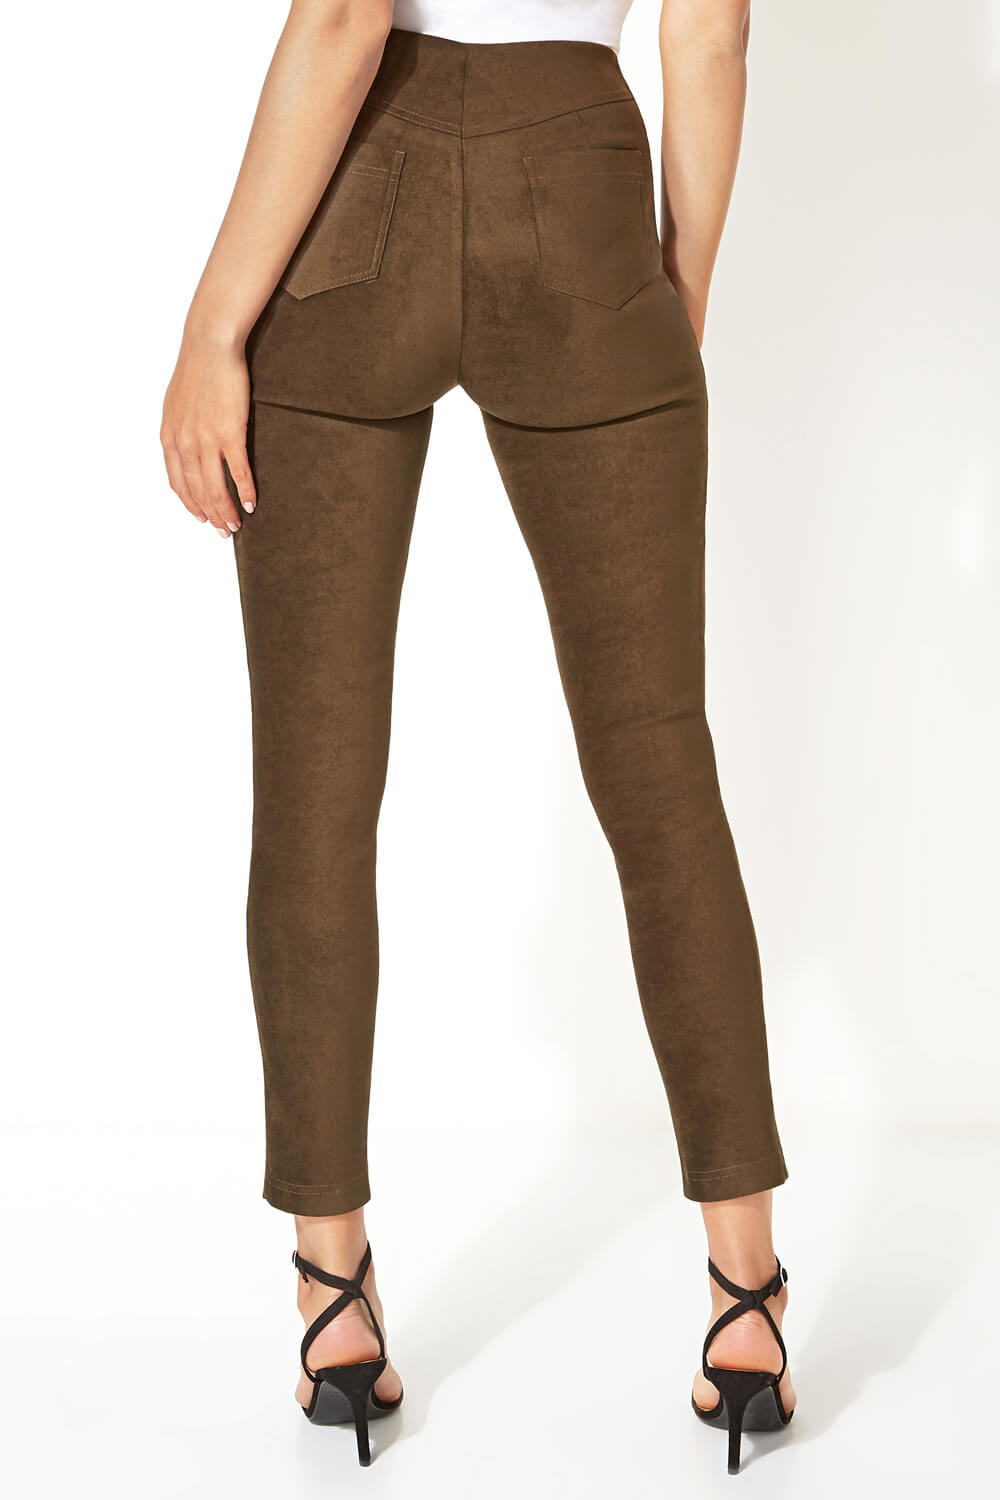 KHAKI Full Length Suedette Stretch Trousers, Image 2 of 5